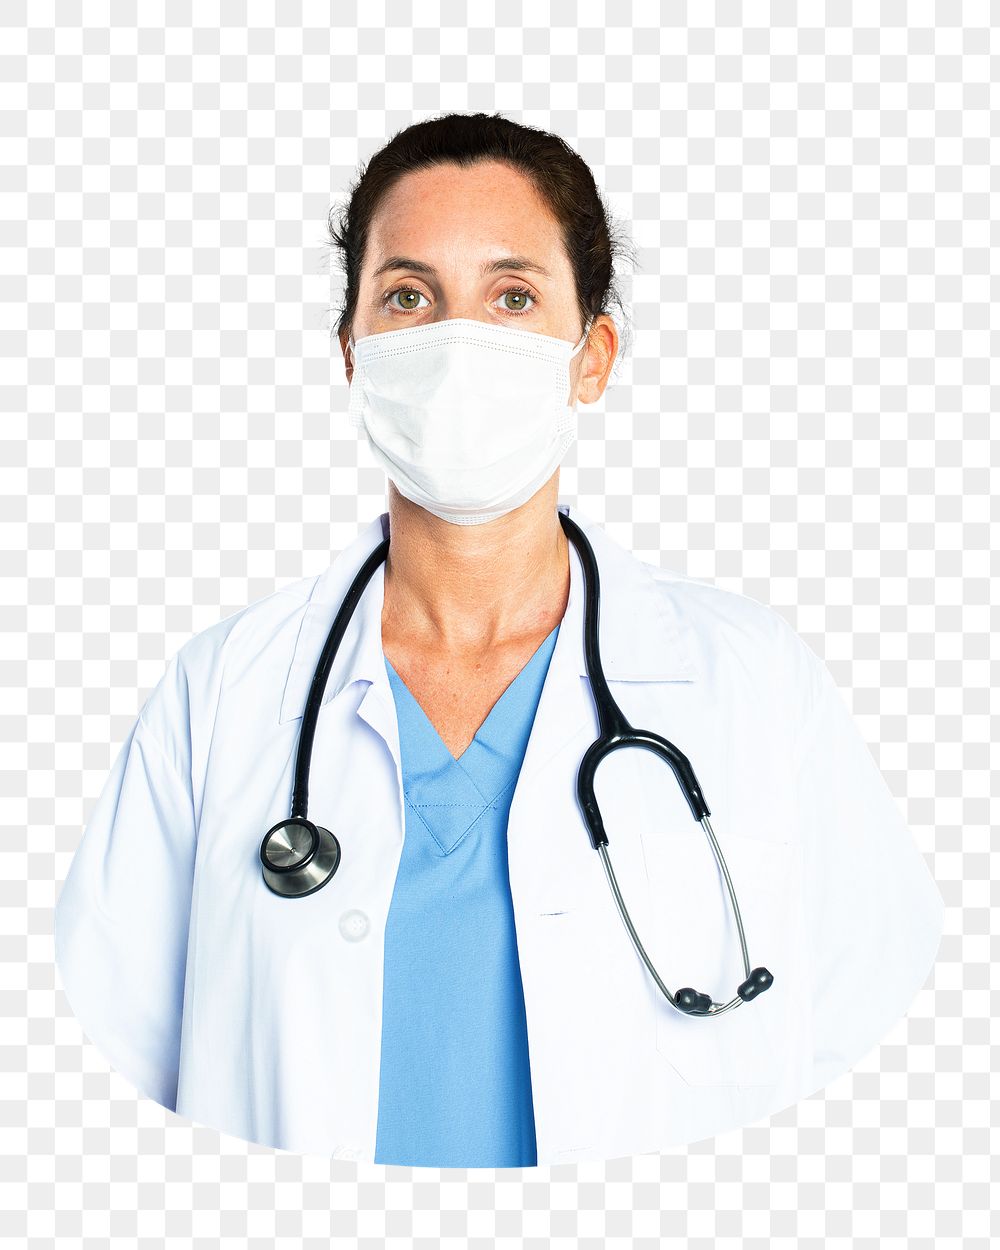 Female doctor png in lab coat with a stethoscope, transparent background